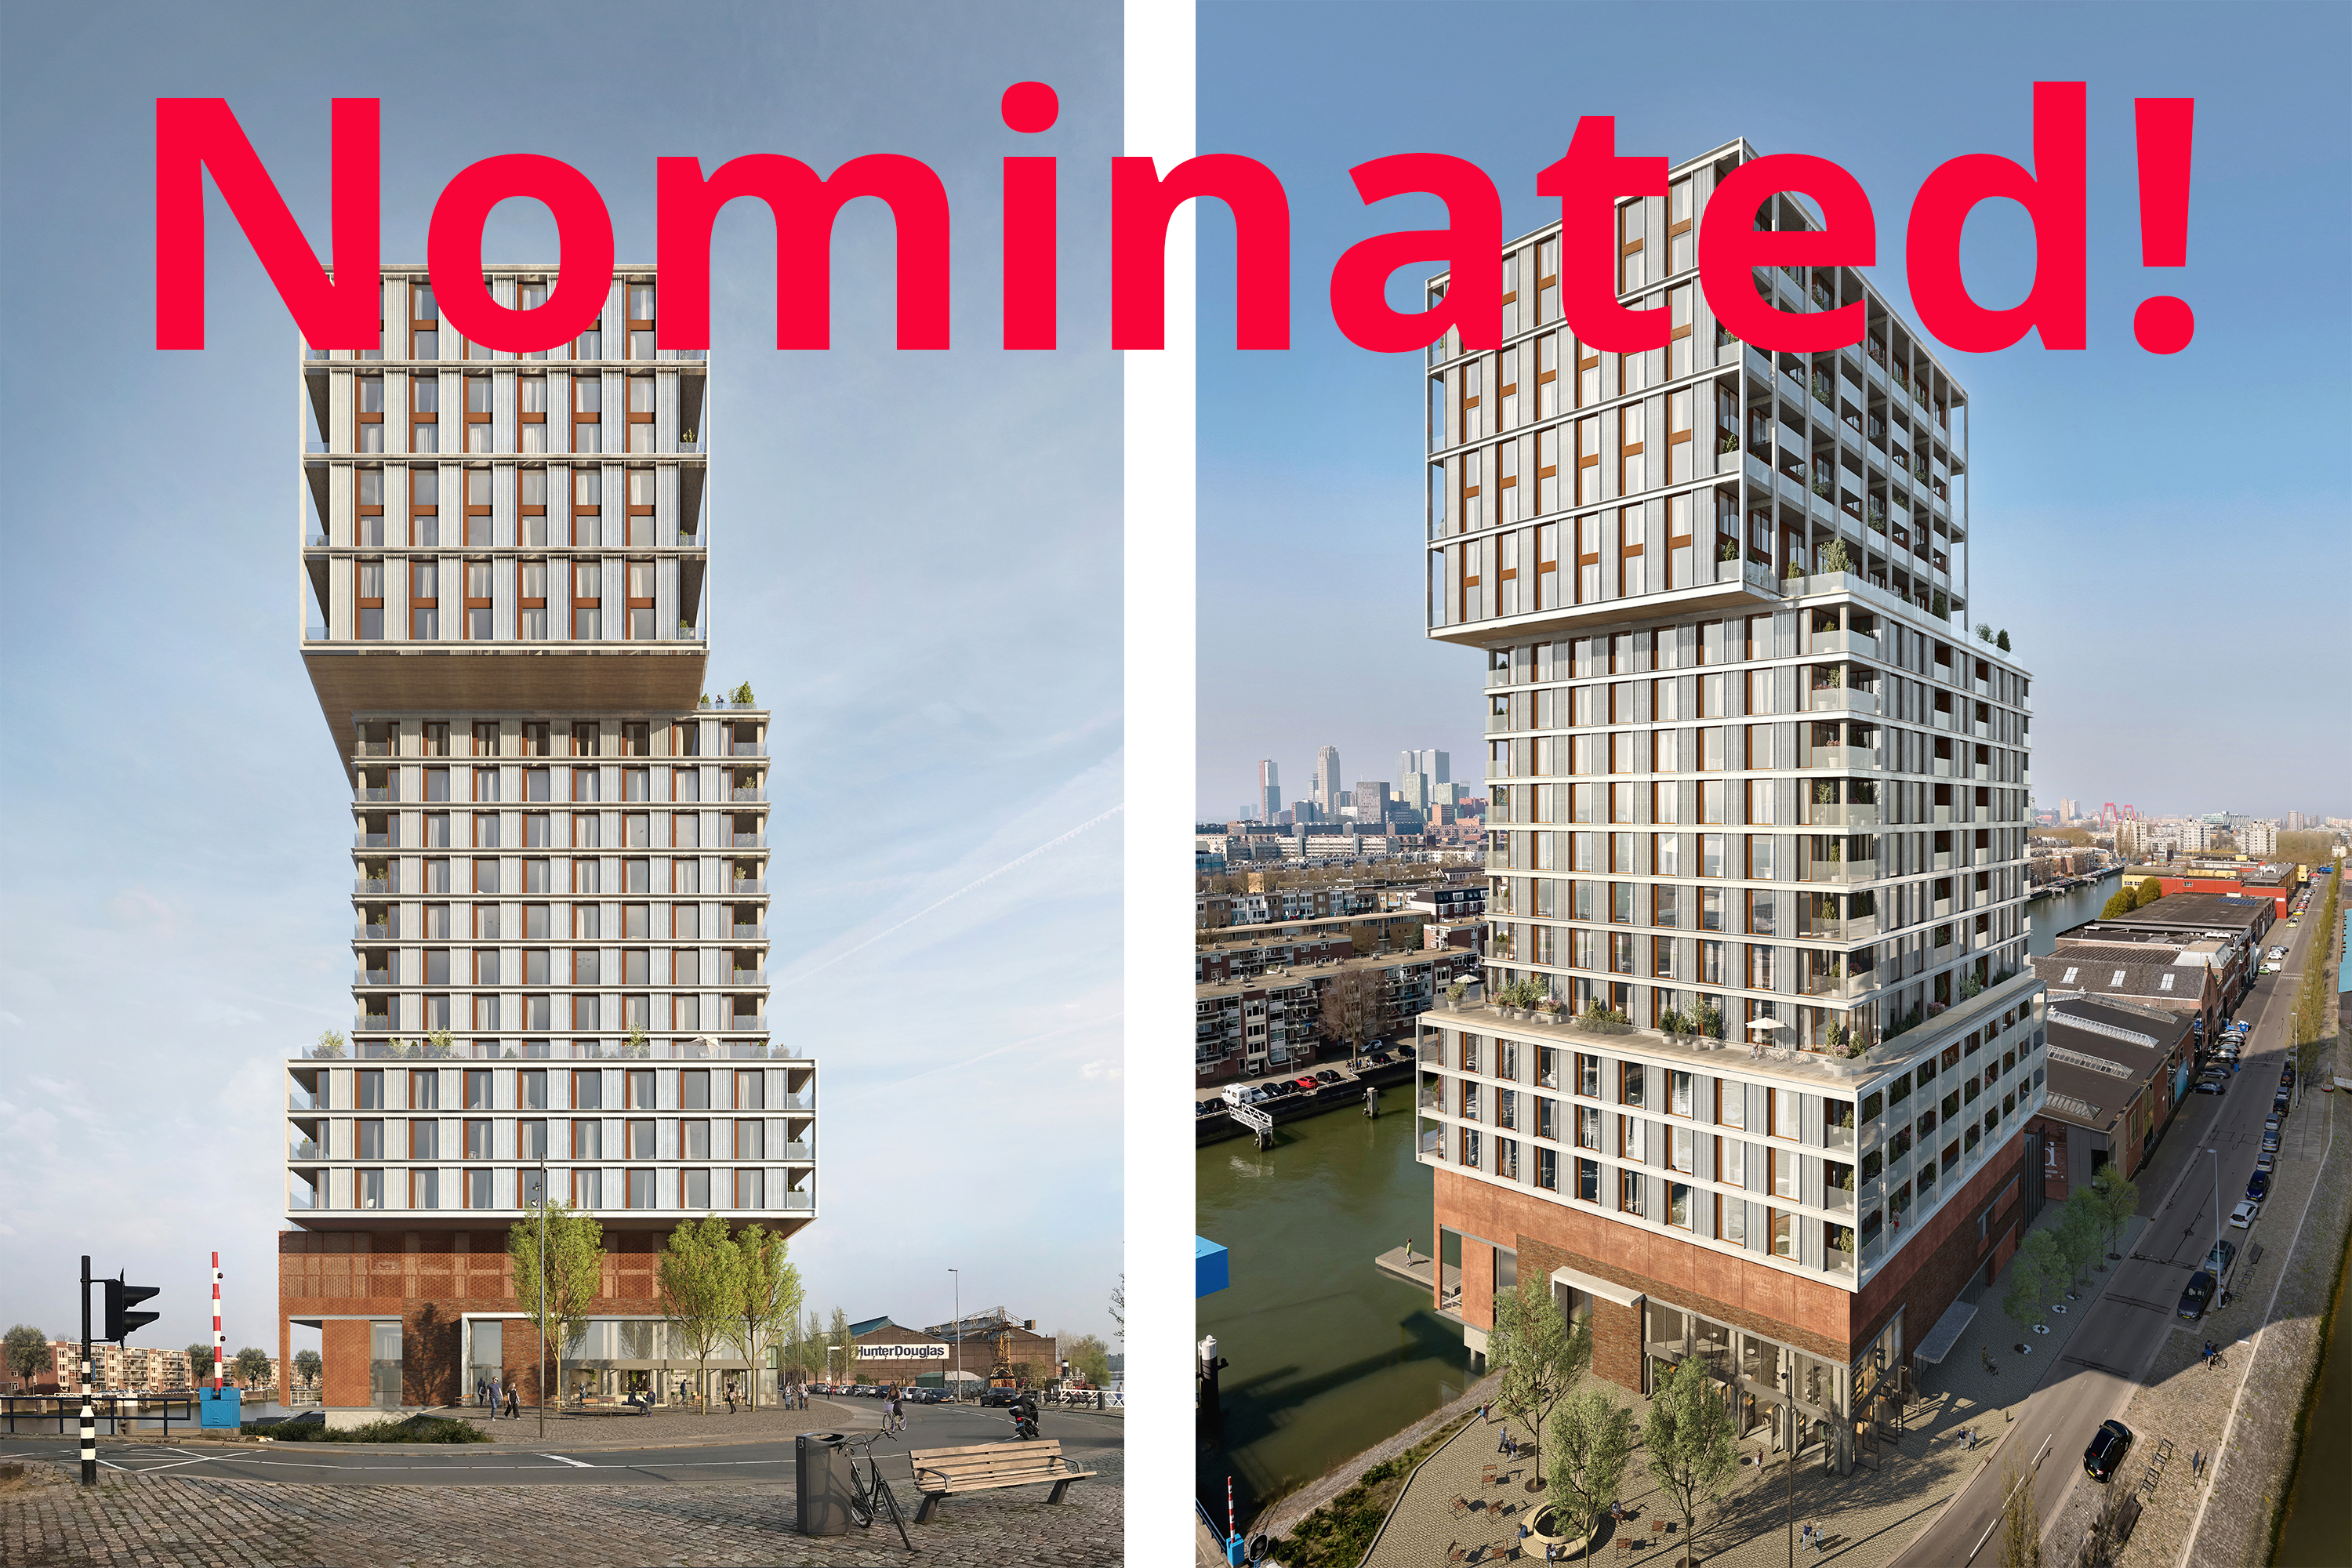 Piekstraat nominated as most striking Rotterdam real estate project 2019